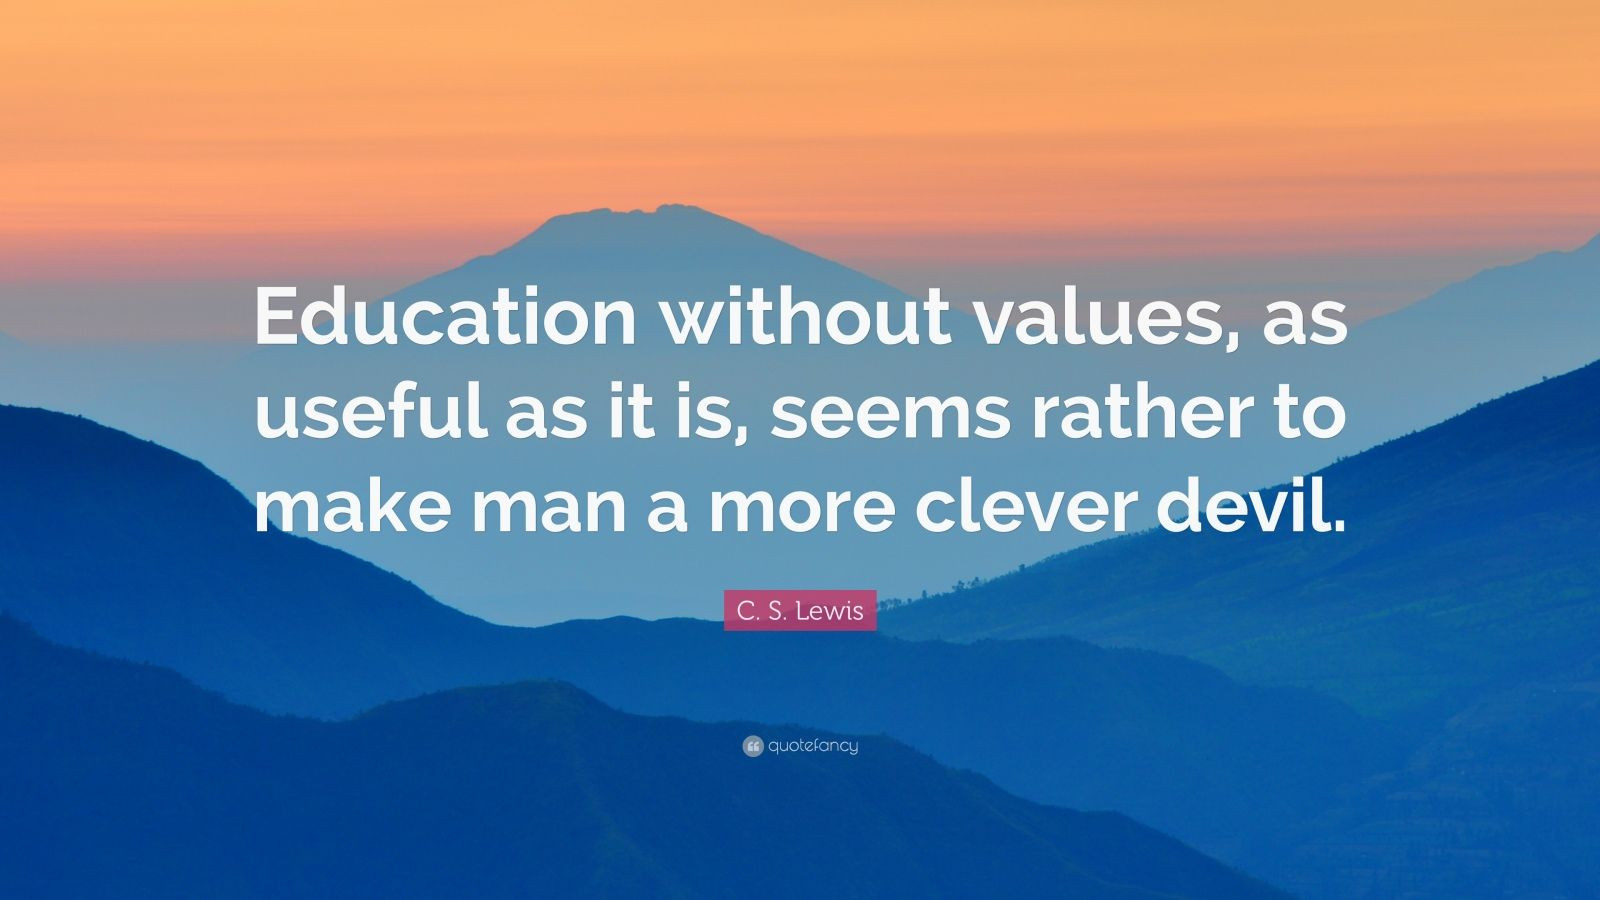 Cs Lewis Education Quotes
 C S Lewis Quote “Education without values as useful as